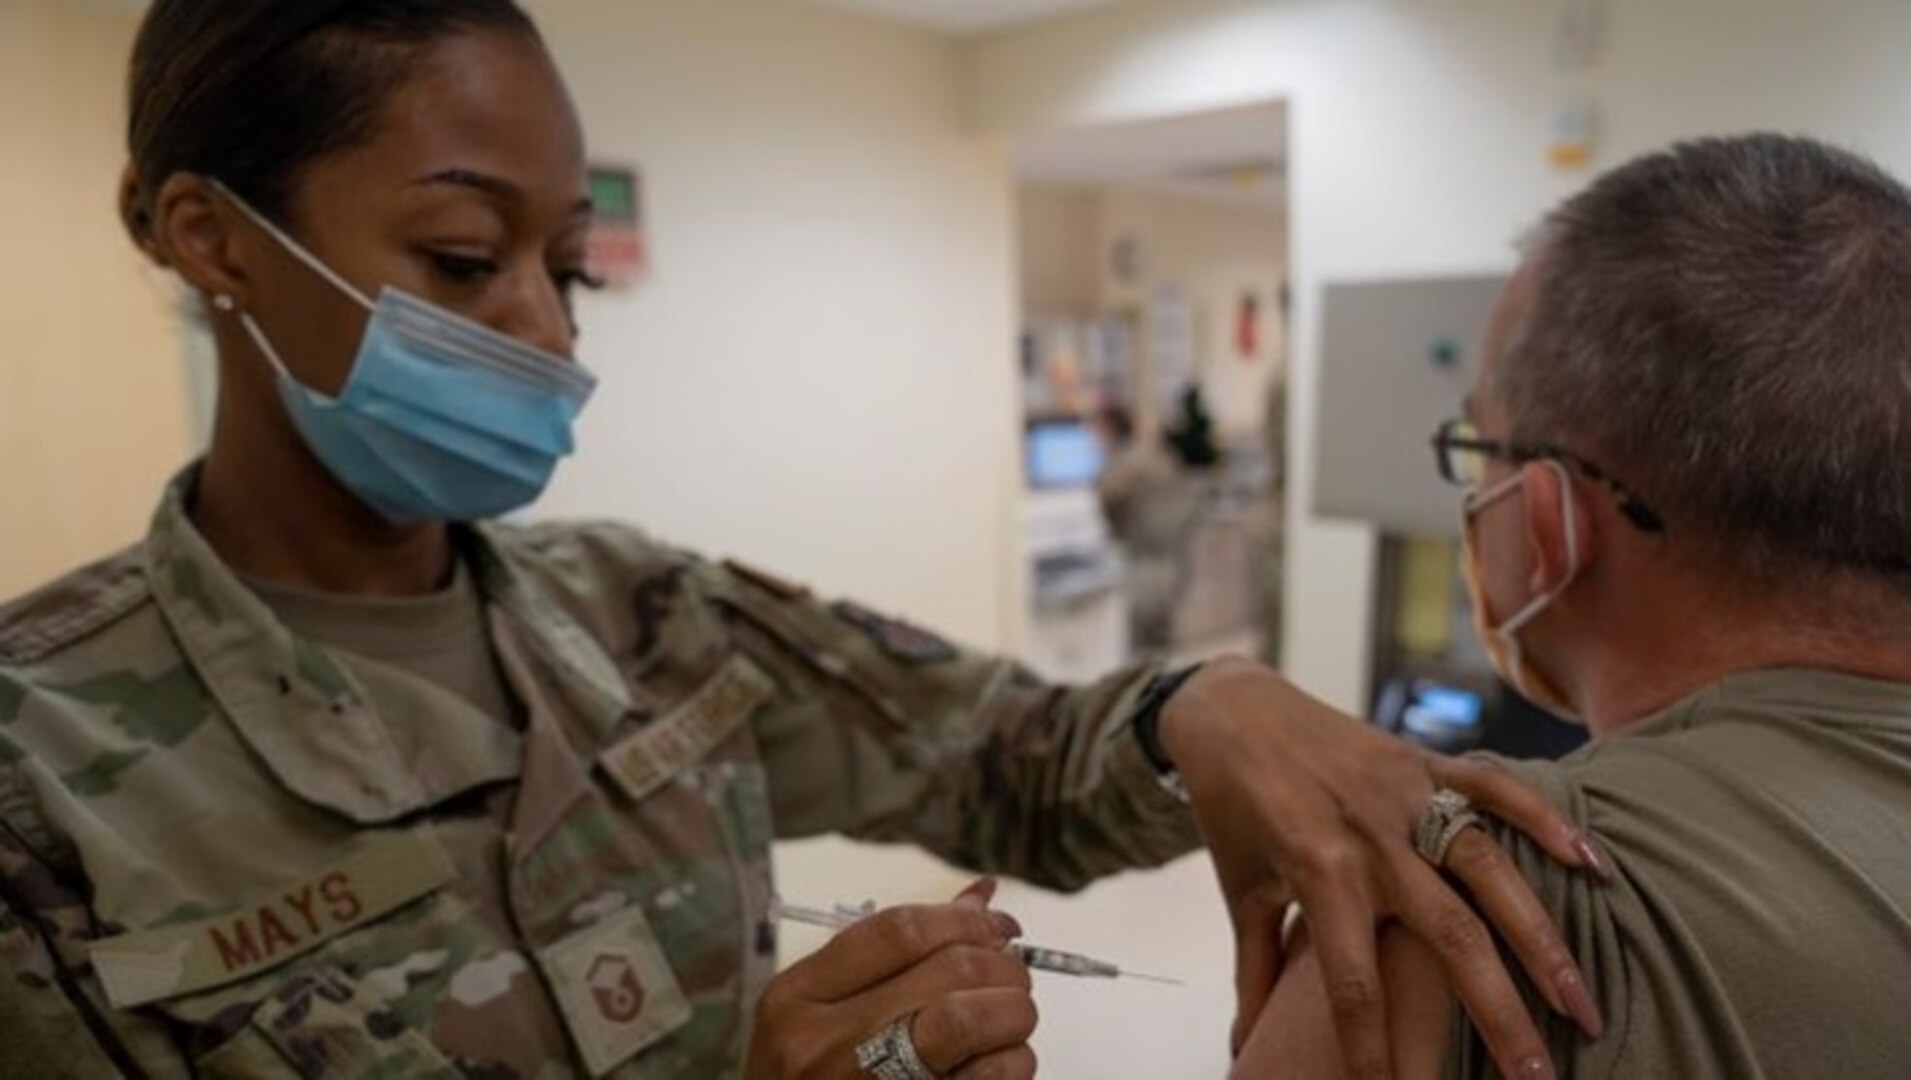 Air Force Master Sgt. La'Kisha Mays, 81st Healthcare Operations Squadron medical specialties flight chief, administers the COVID-19 vaccine to Air Force Col. (Dr.) Wayne Latack, 81st Medical Group internal medicine residency program director, at Keesler Medical Center (Photo by: Air Force Senior Airman Kimberly Mueller, 81st Training Wing Public Affairs).